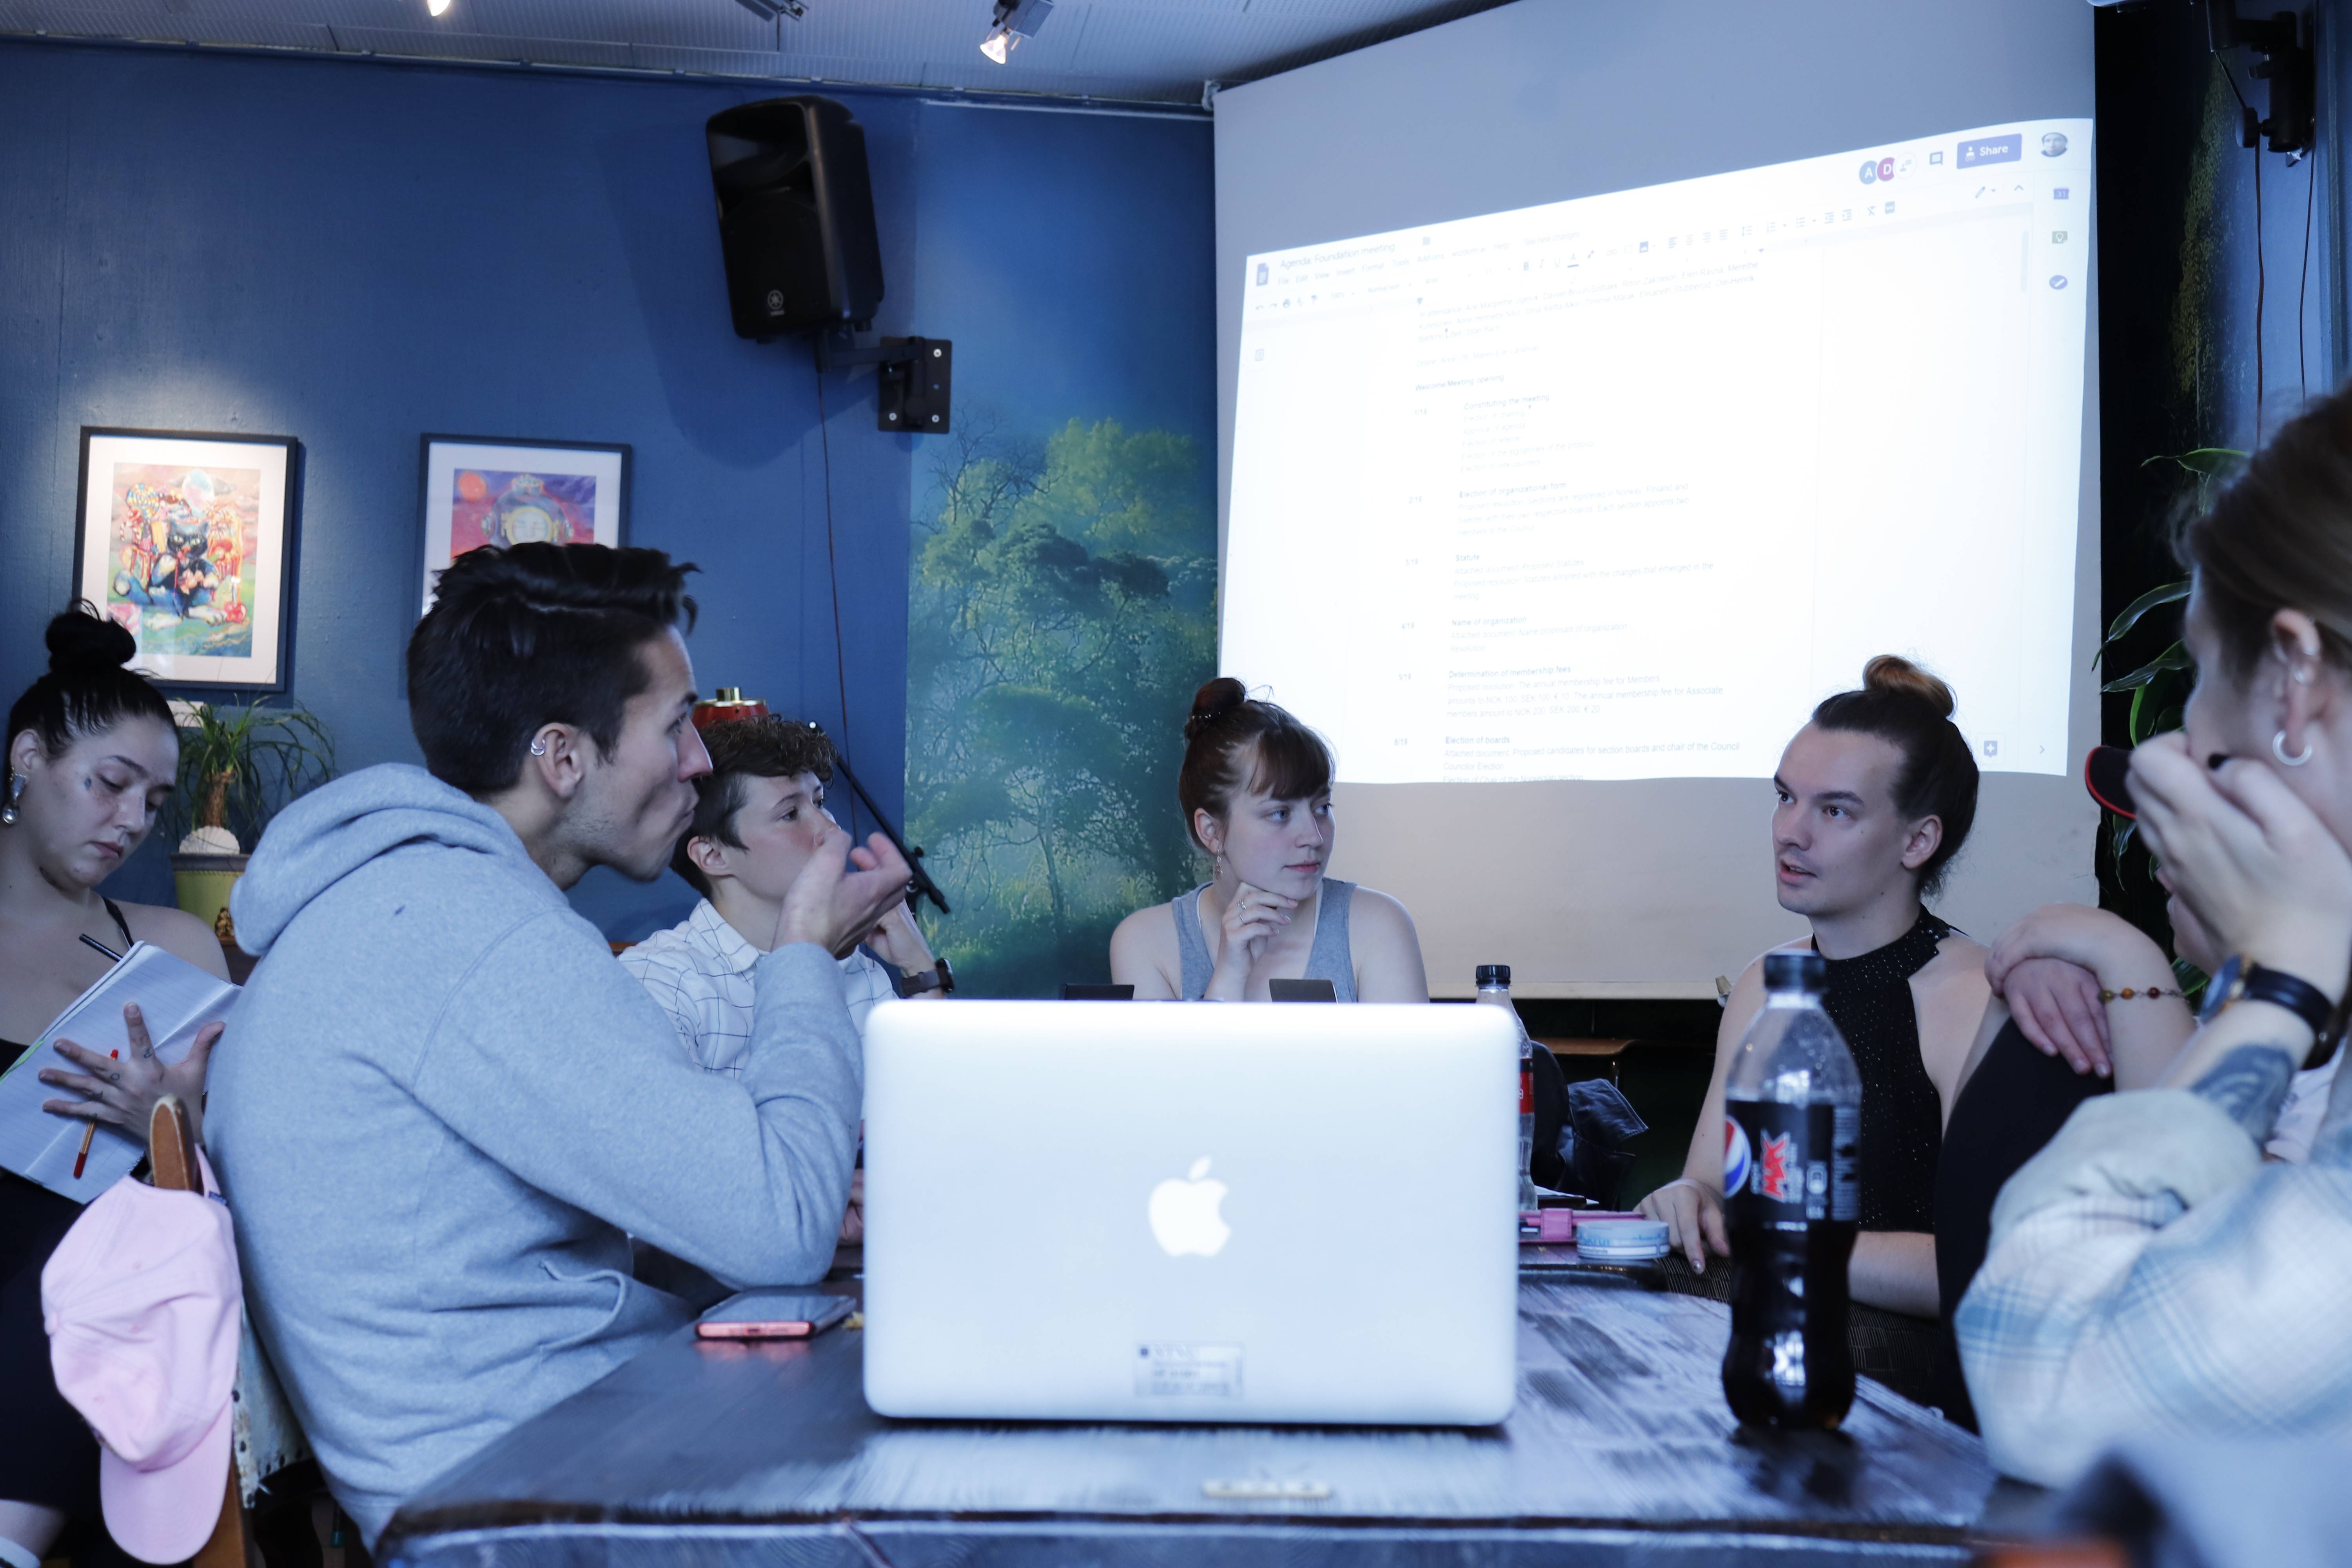 A group of people having a meeting, sitting around the same table, with a projector and a person taking notes in the background.